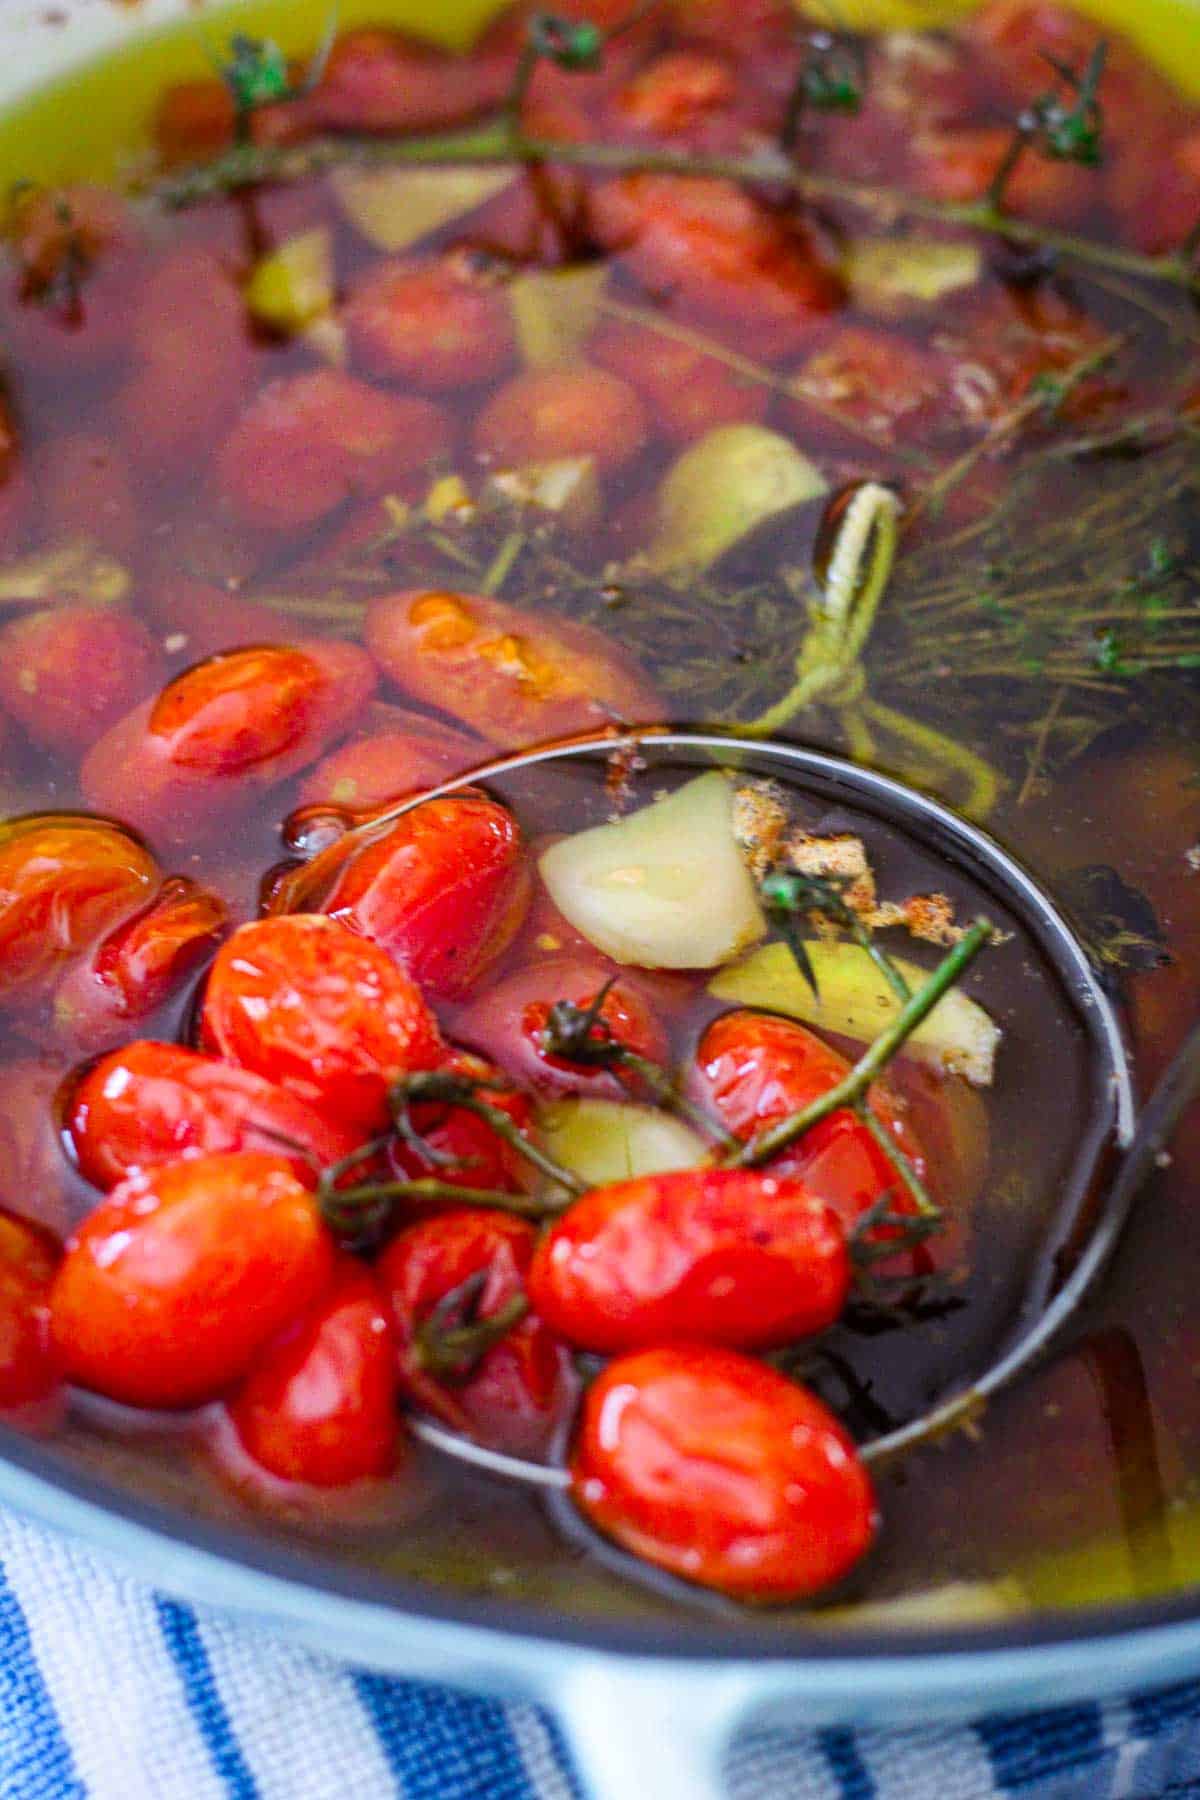 Tomatoes confit with garlic and herbs in olive oil, just roasted shown in the baking dish.